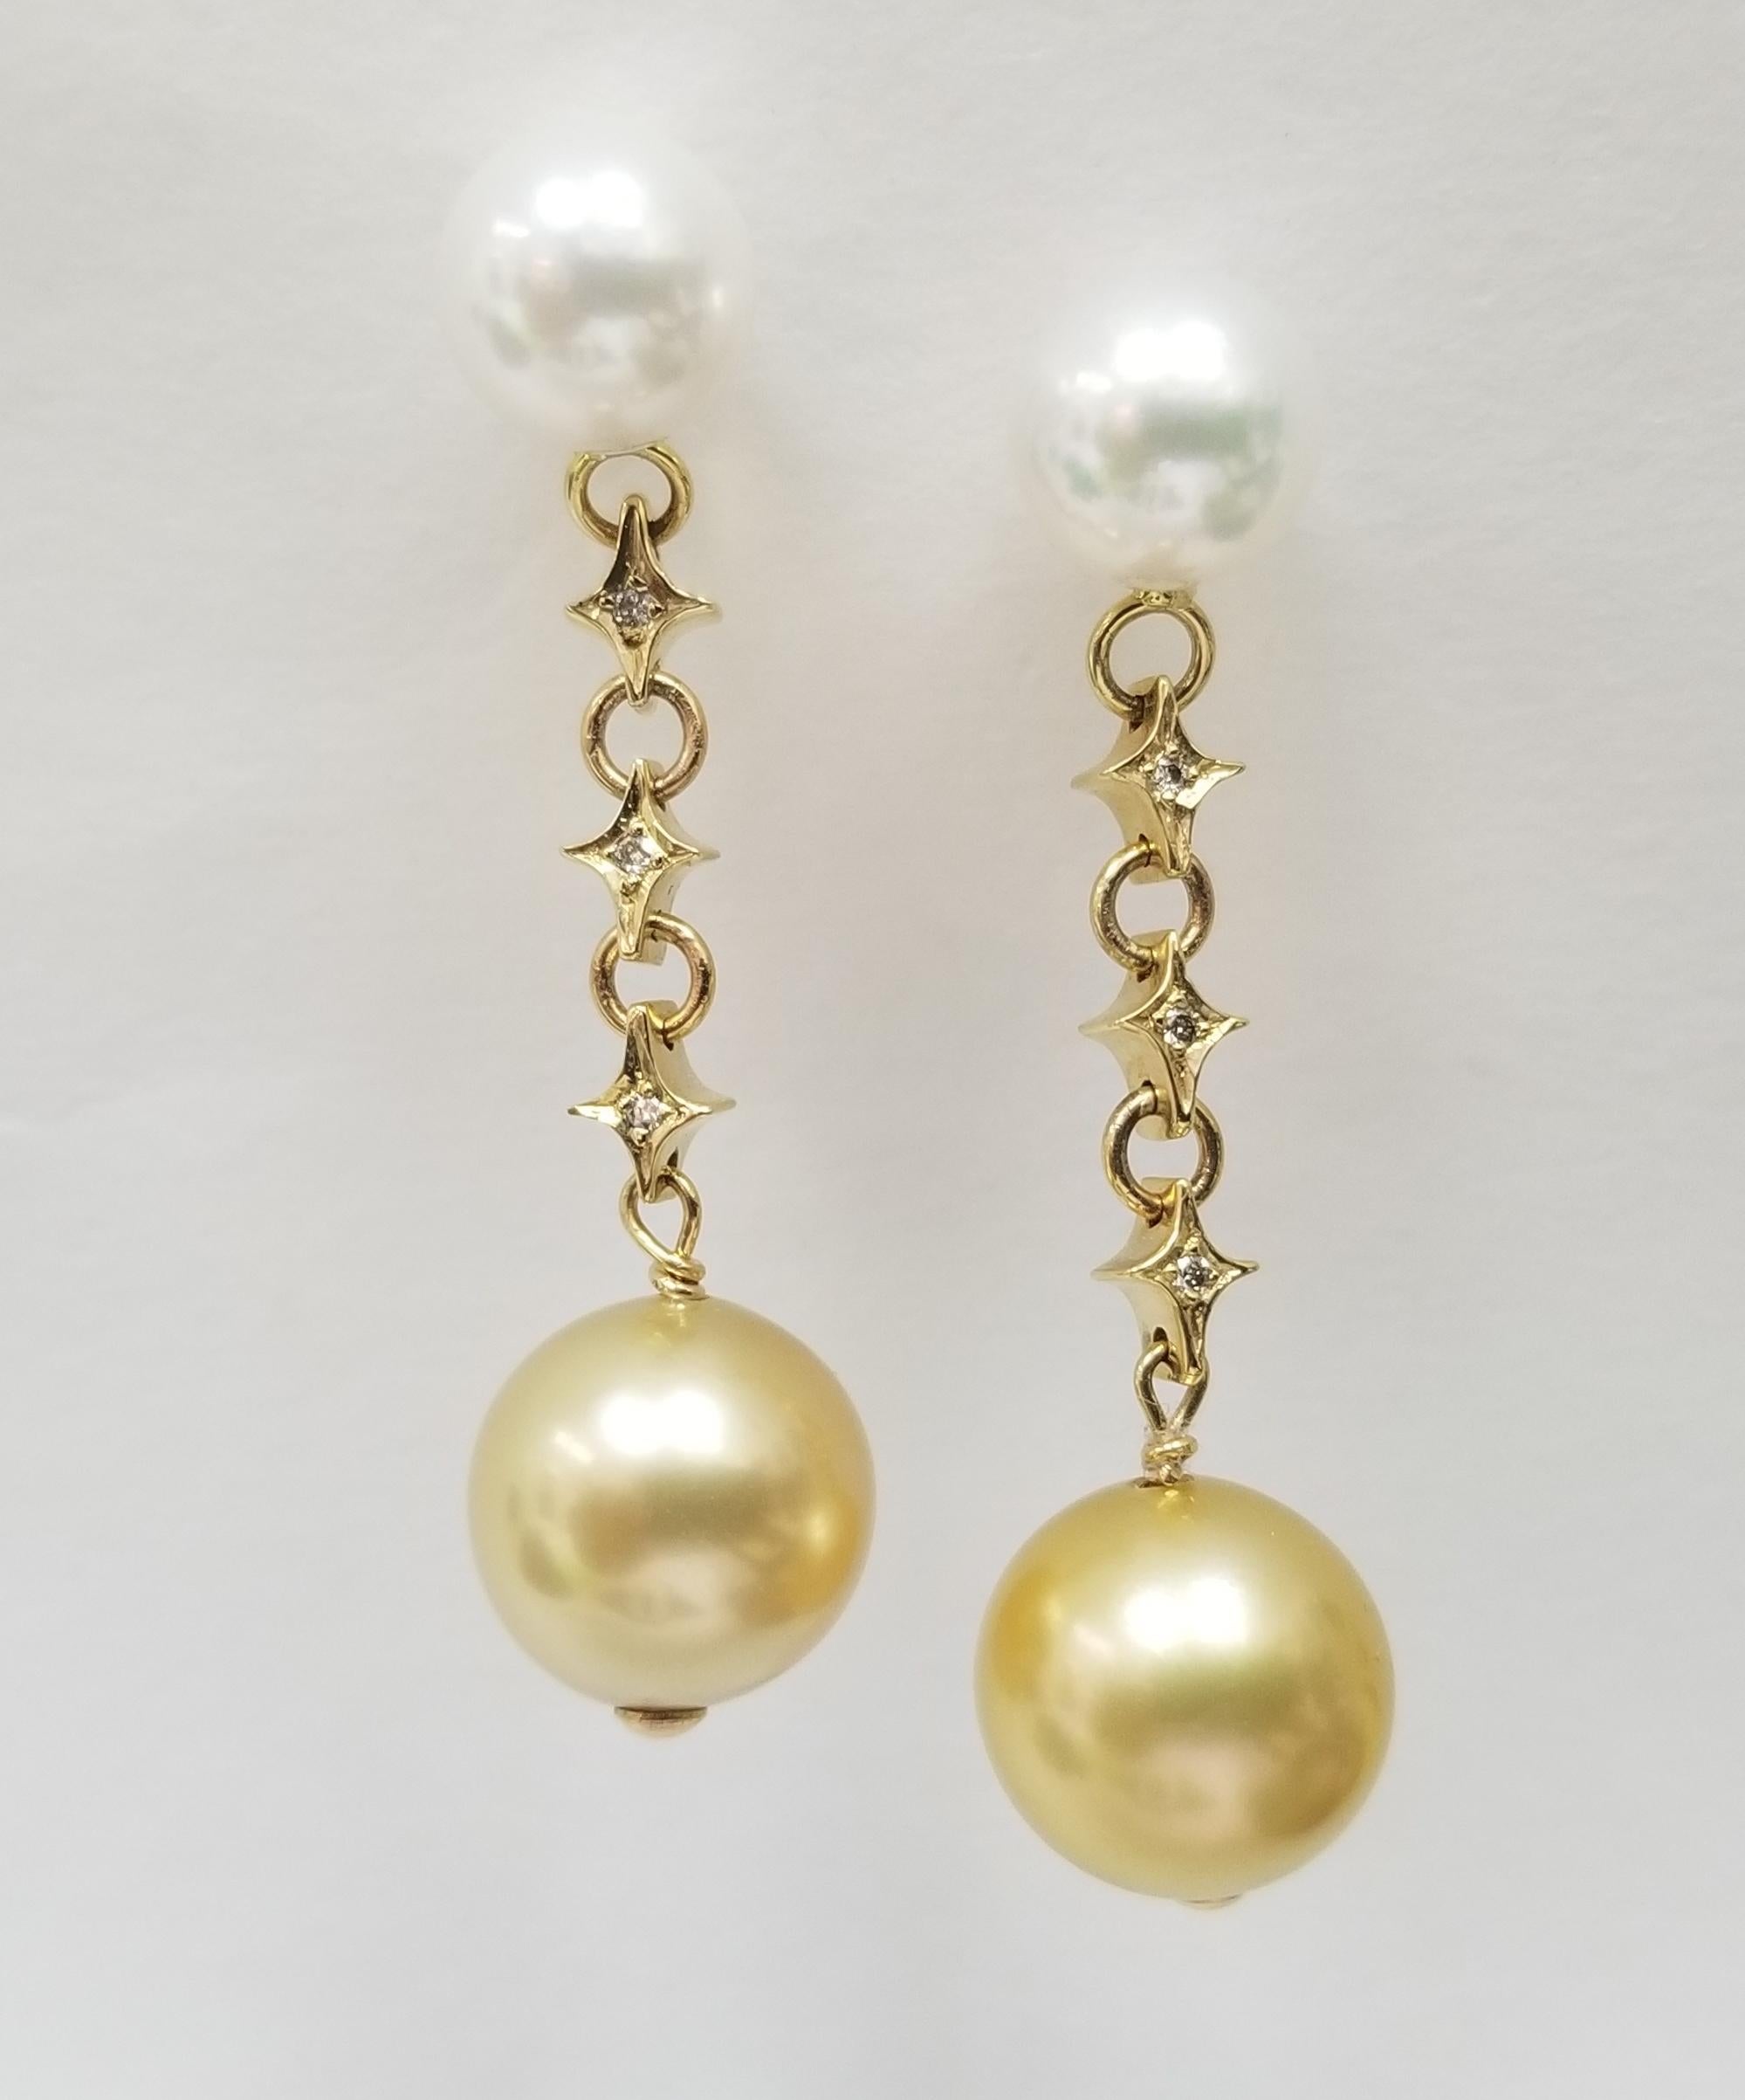 Contemporary 14 Karat Gold Natural White and Yellow South Sea Pearl and Diamond Earrings